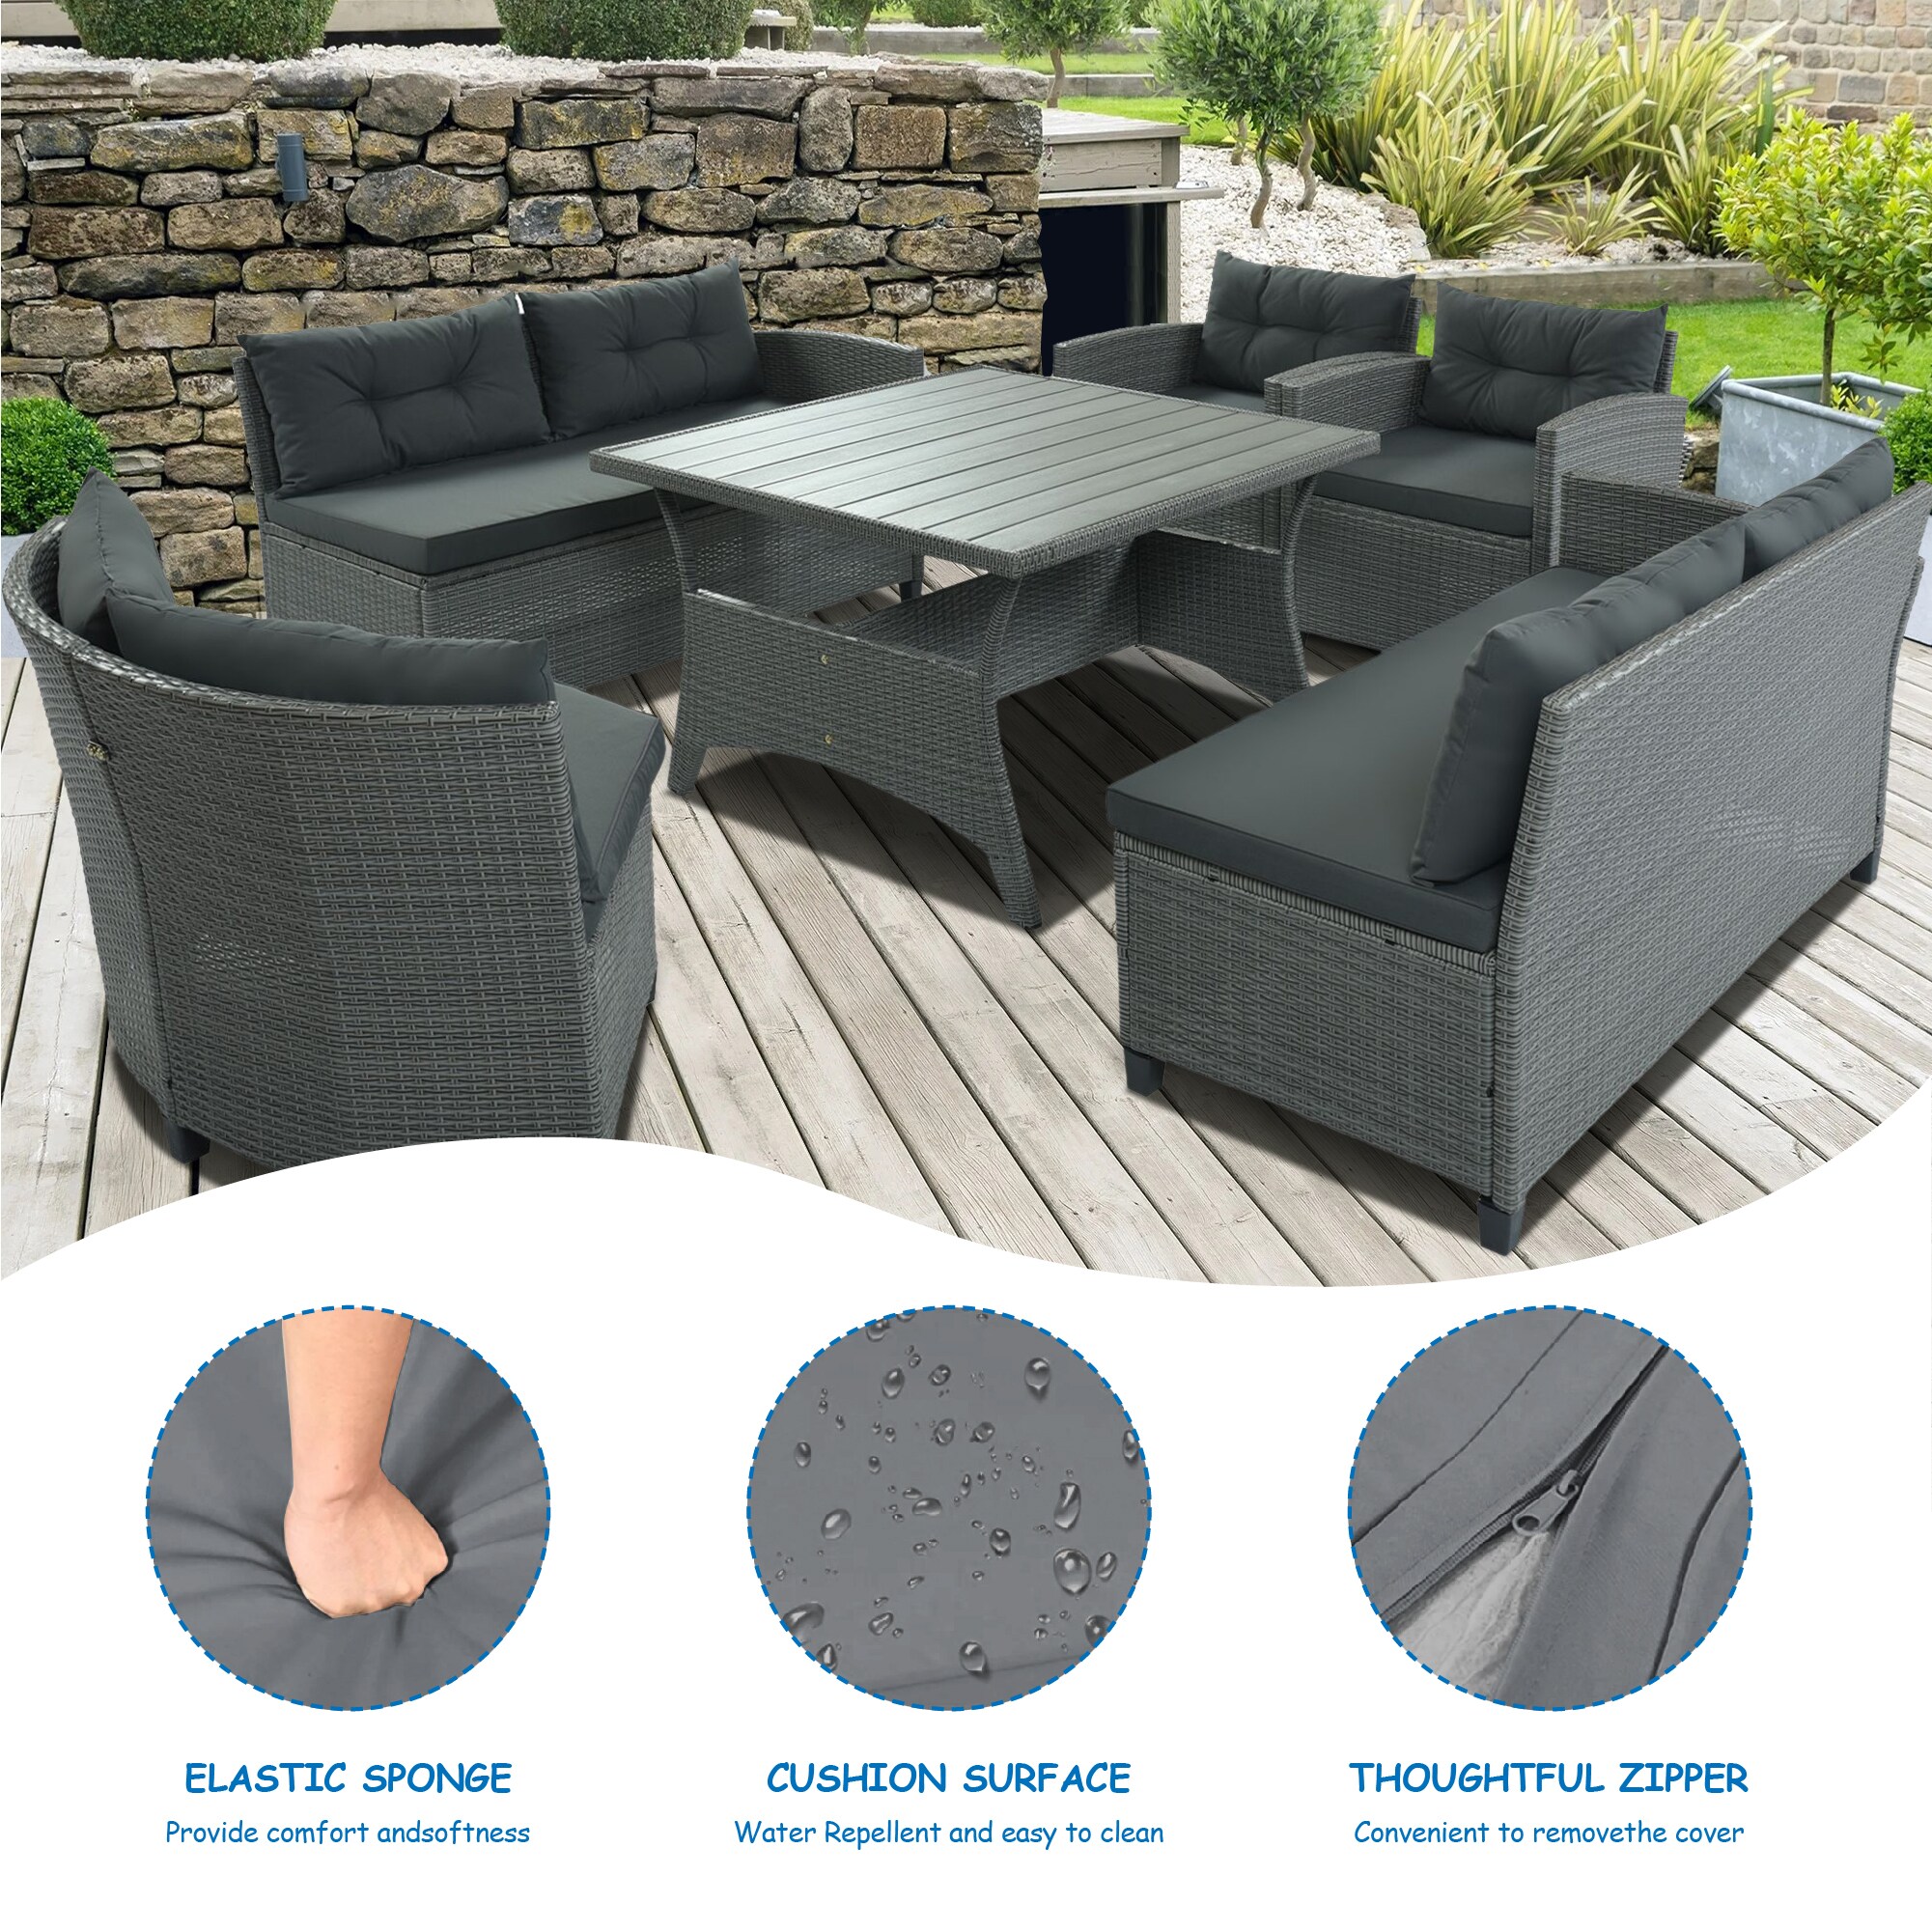 Azoriah Wicker 7 - Person Oversized Armrest Outdoor Seating Group with Storage Latitude Run Cushion Color: Navy Blue